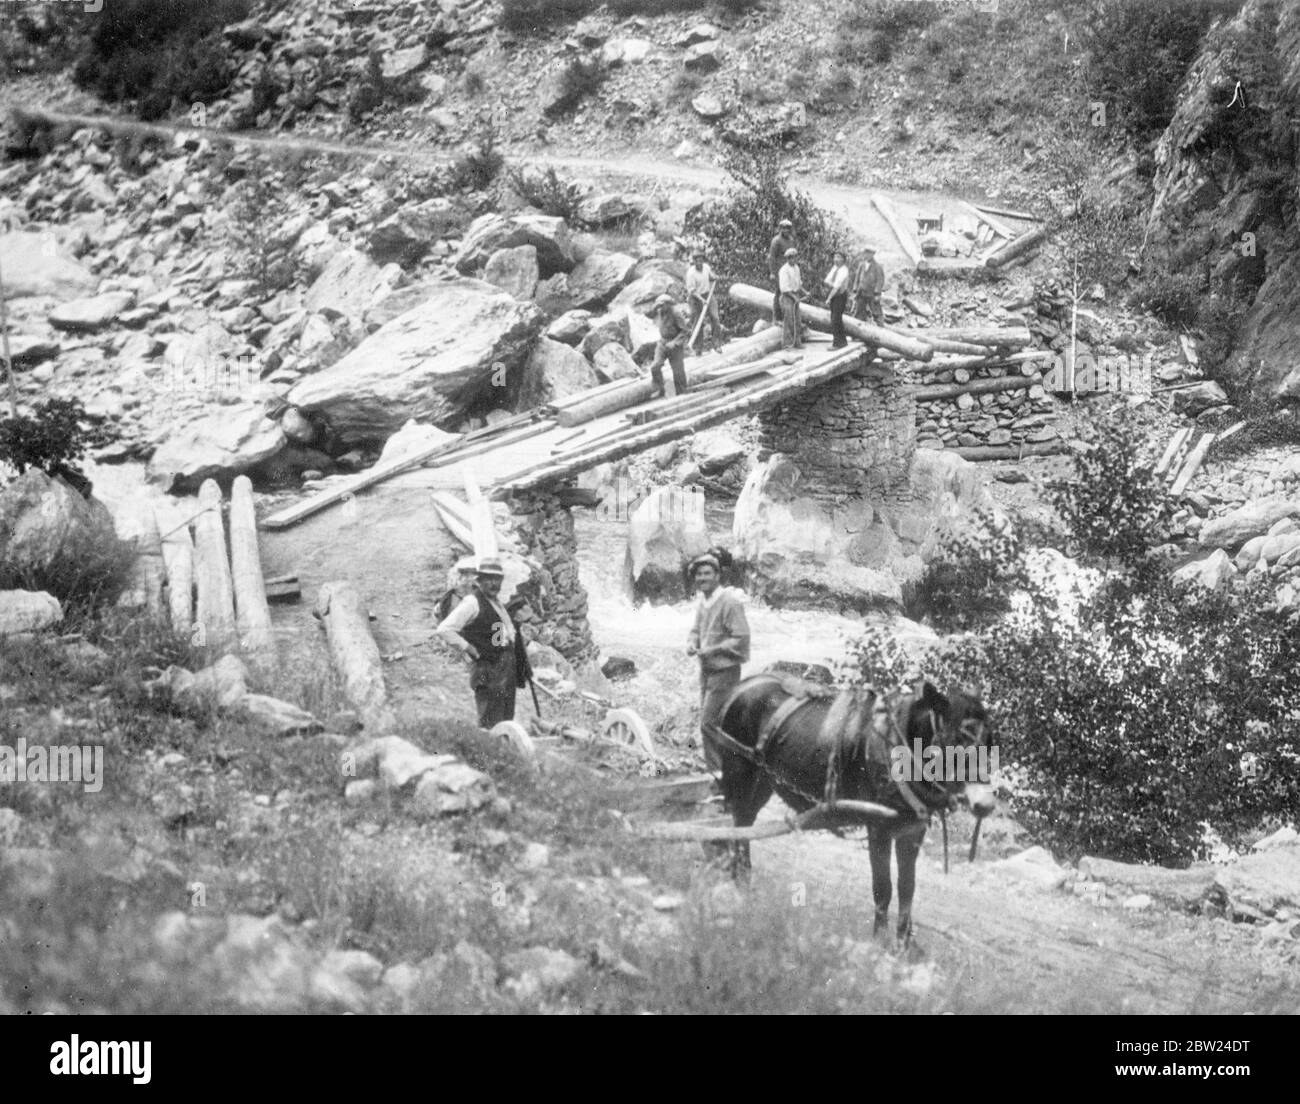 Workmen repairing the frontier bridge which links Italy and France near Isola, the French village in Italian territory. The population of the village has orders to quit from the Italian authorities on the grounds that the land is required for Italian defence works. The French colony has been granted a short period of grace and is trying to get in the harvest before leaving it. 10 September 1938 Stock Photo